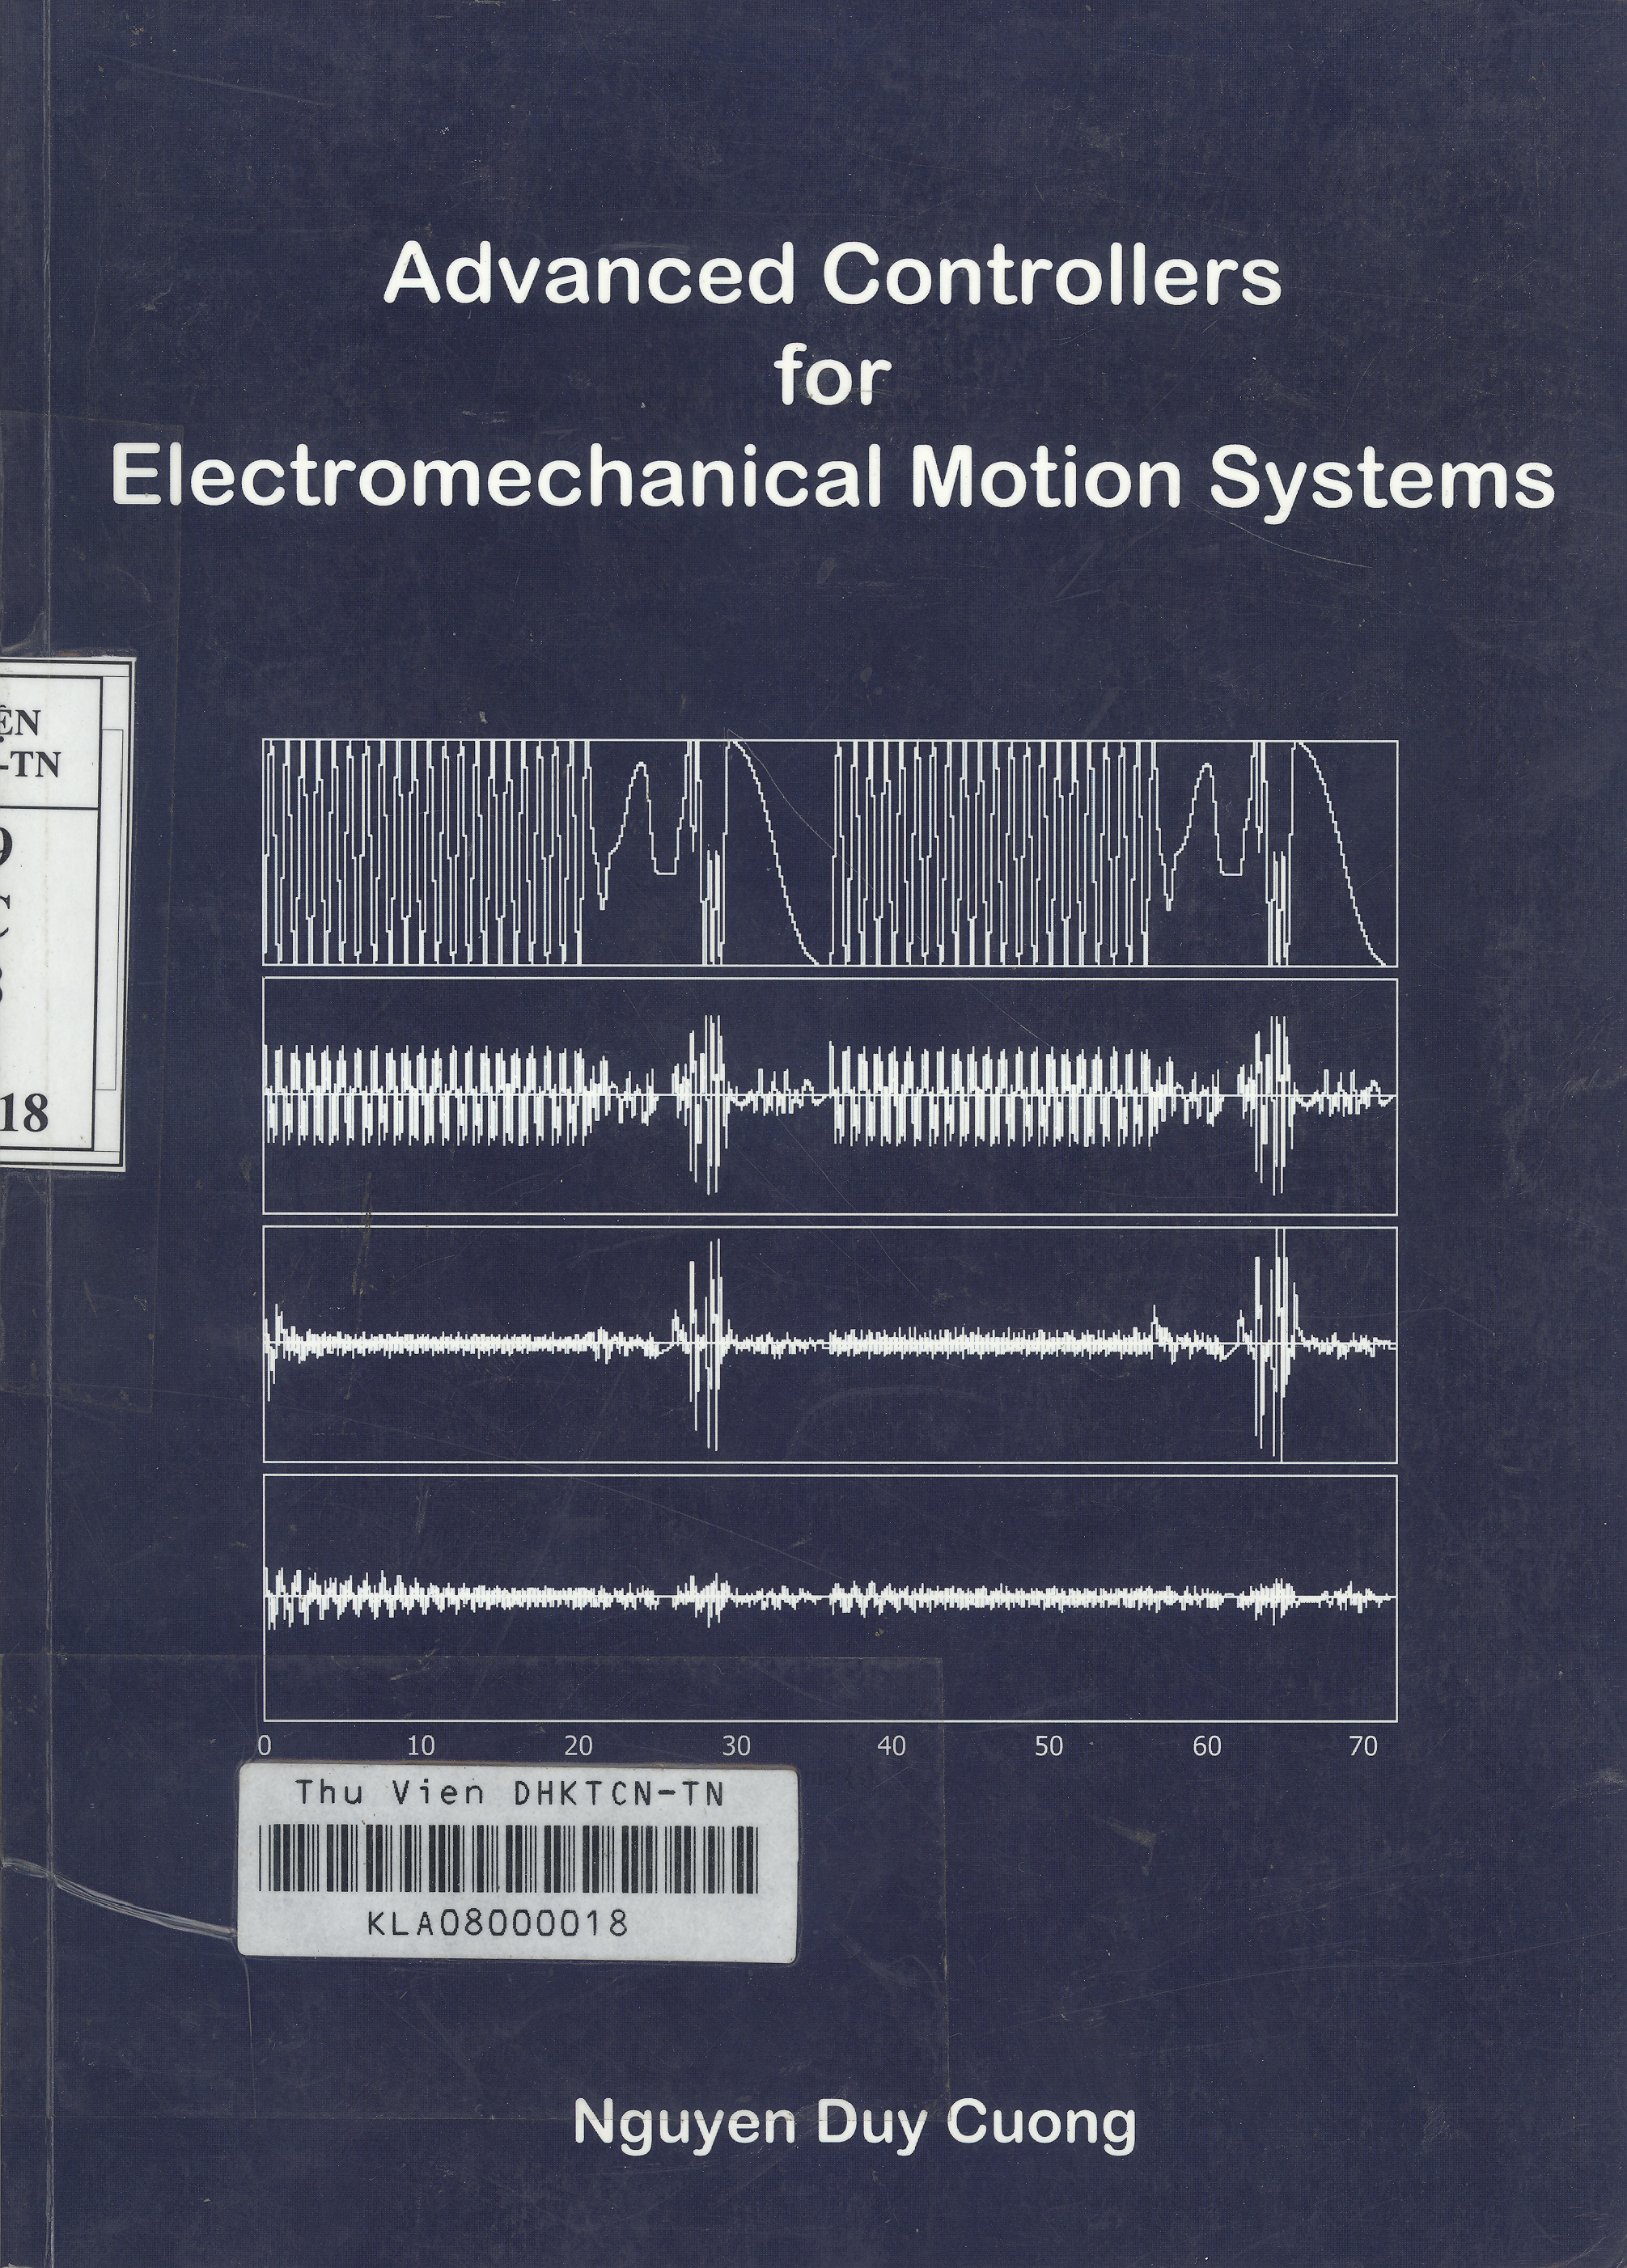 Advanced Controllers for electromechanical motion systems